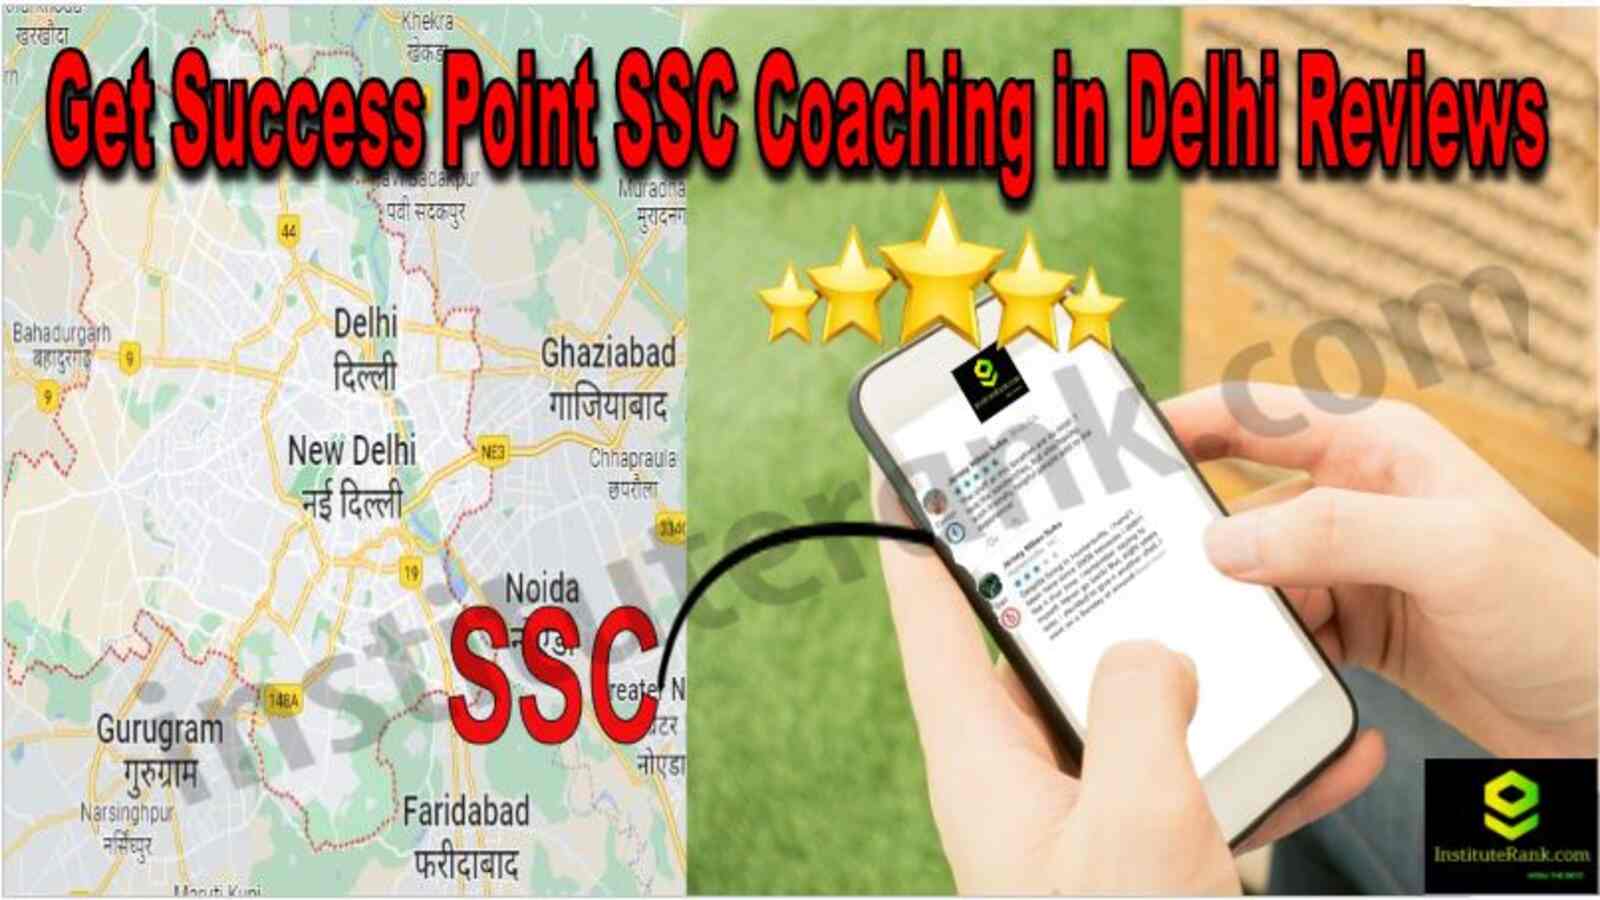 Get Success Point SSC Coaching in Delhi Reviews